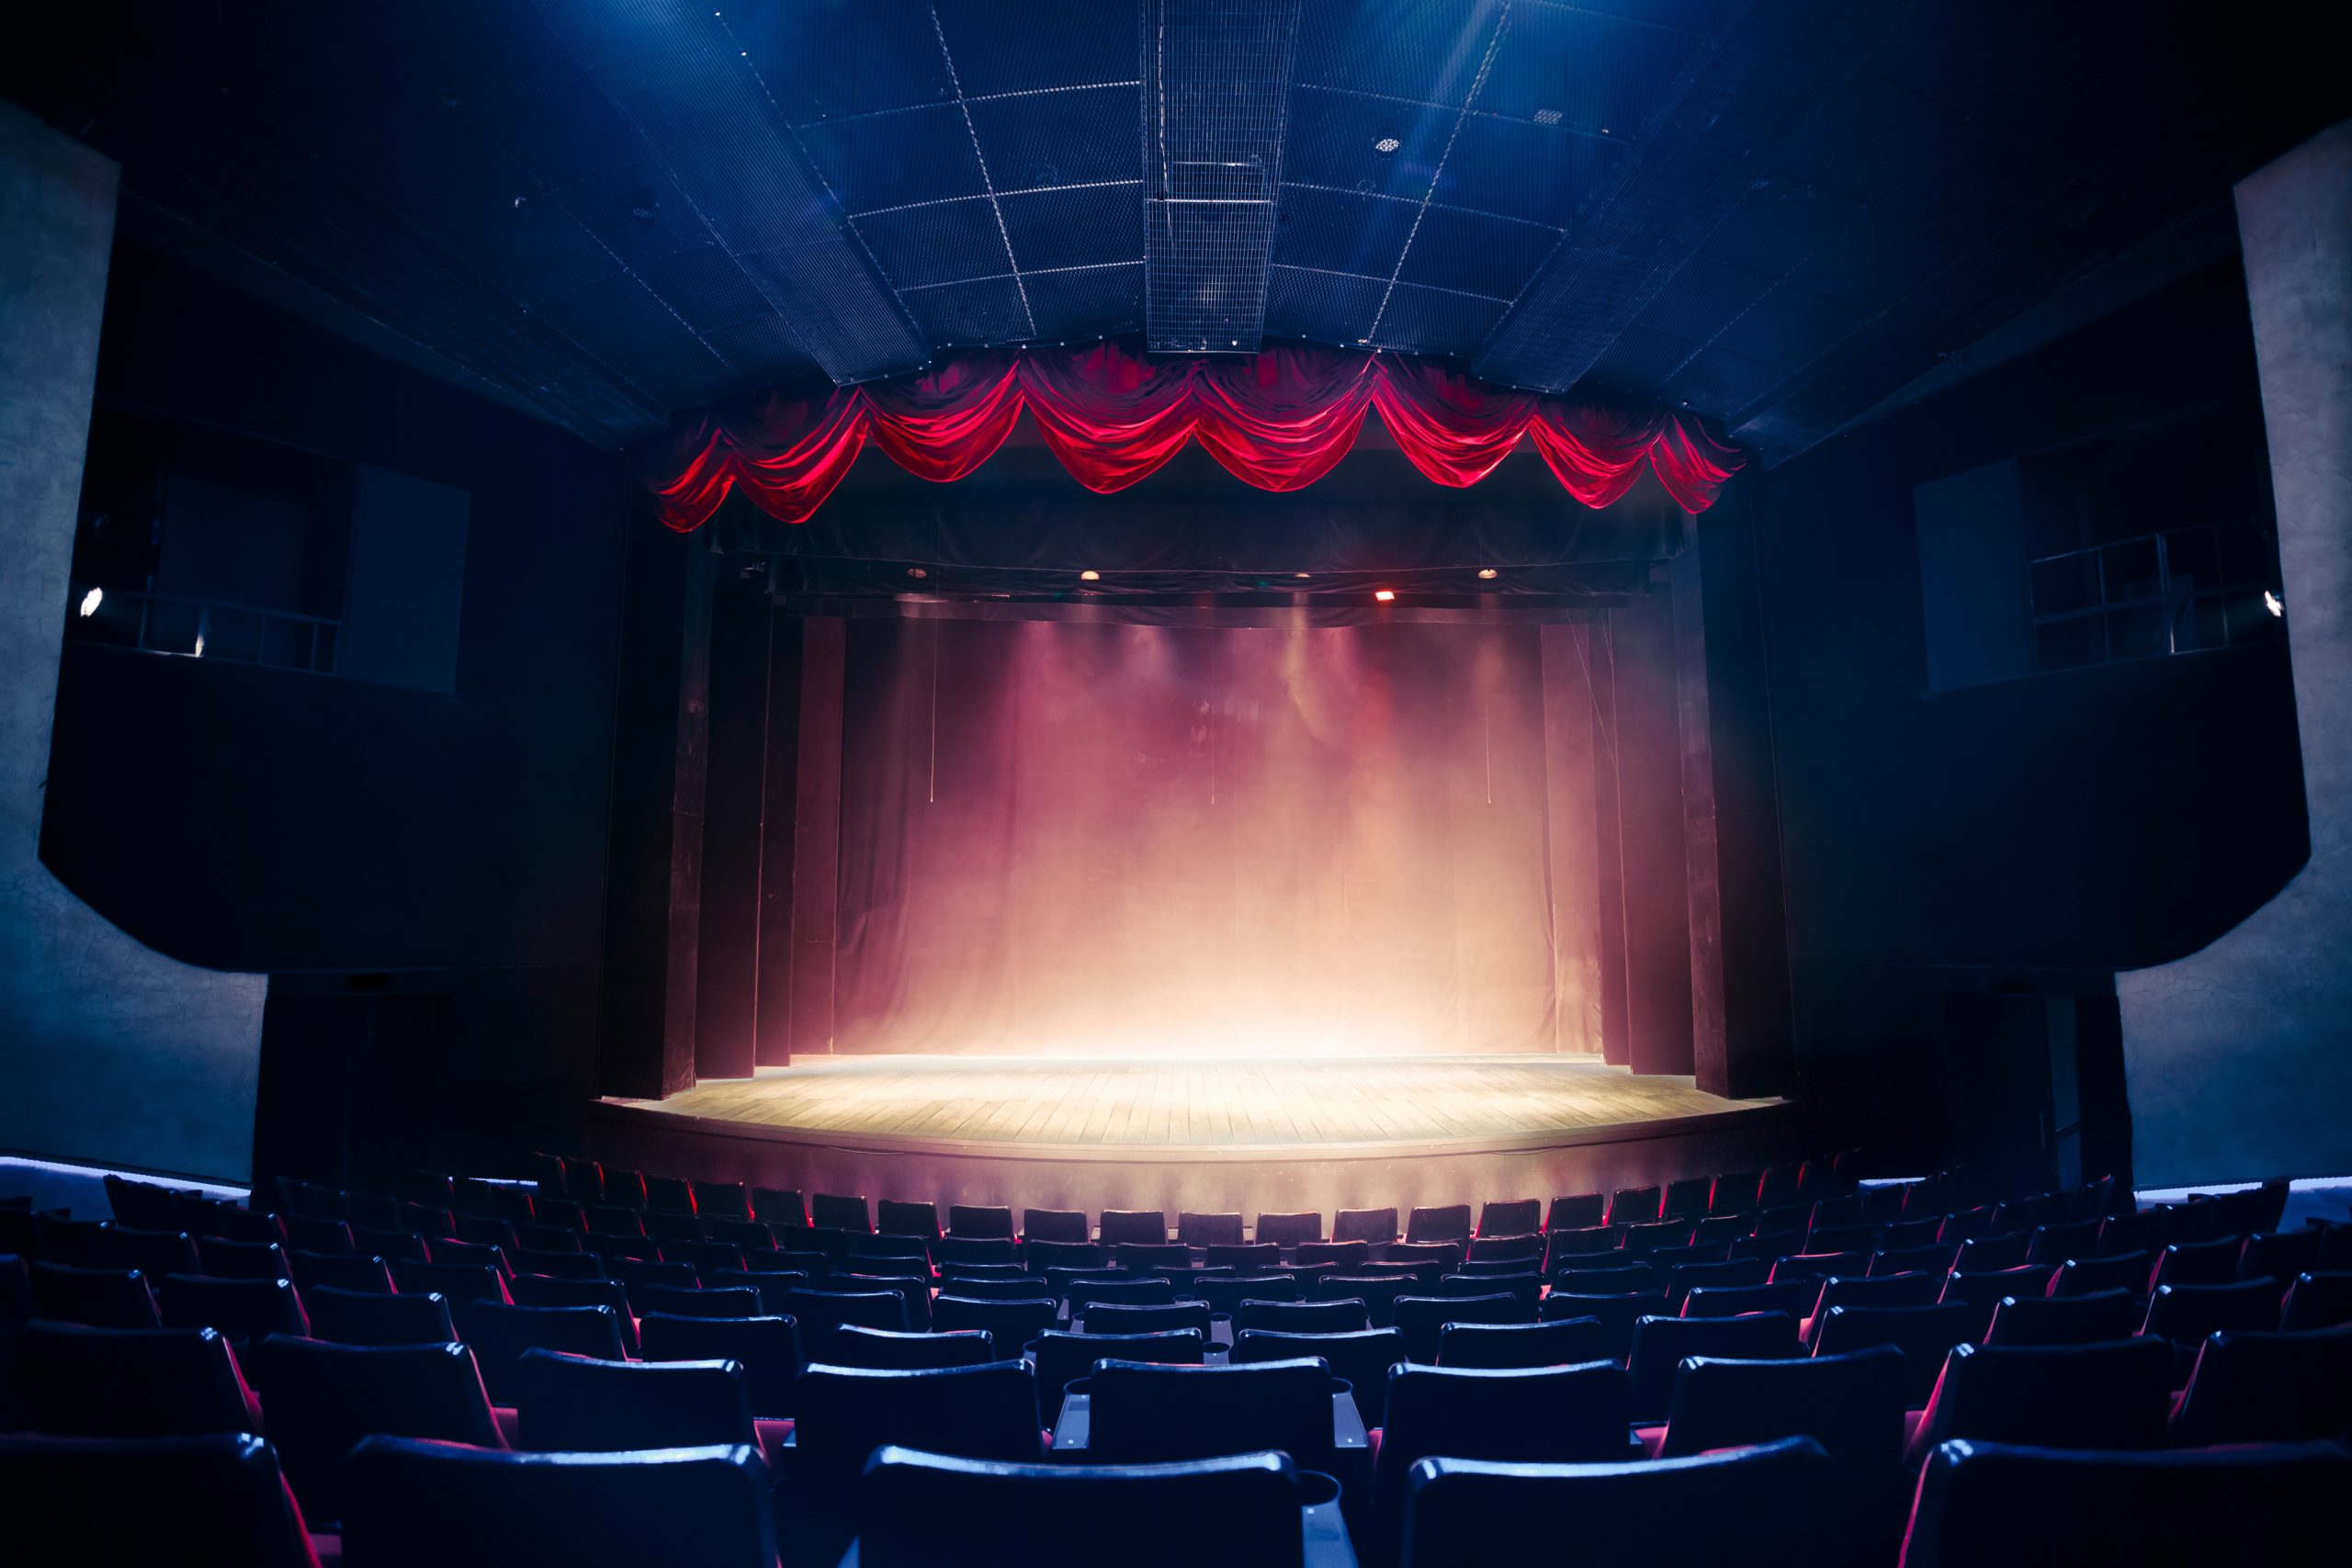 Theater curtain and stage with dramatic lighting